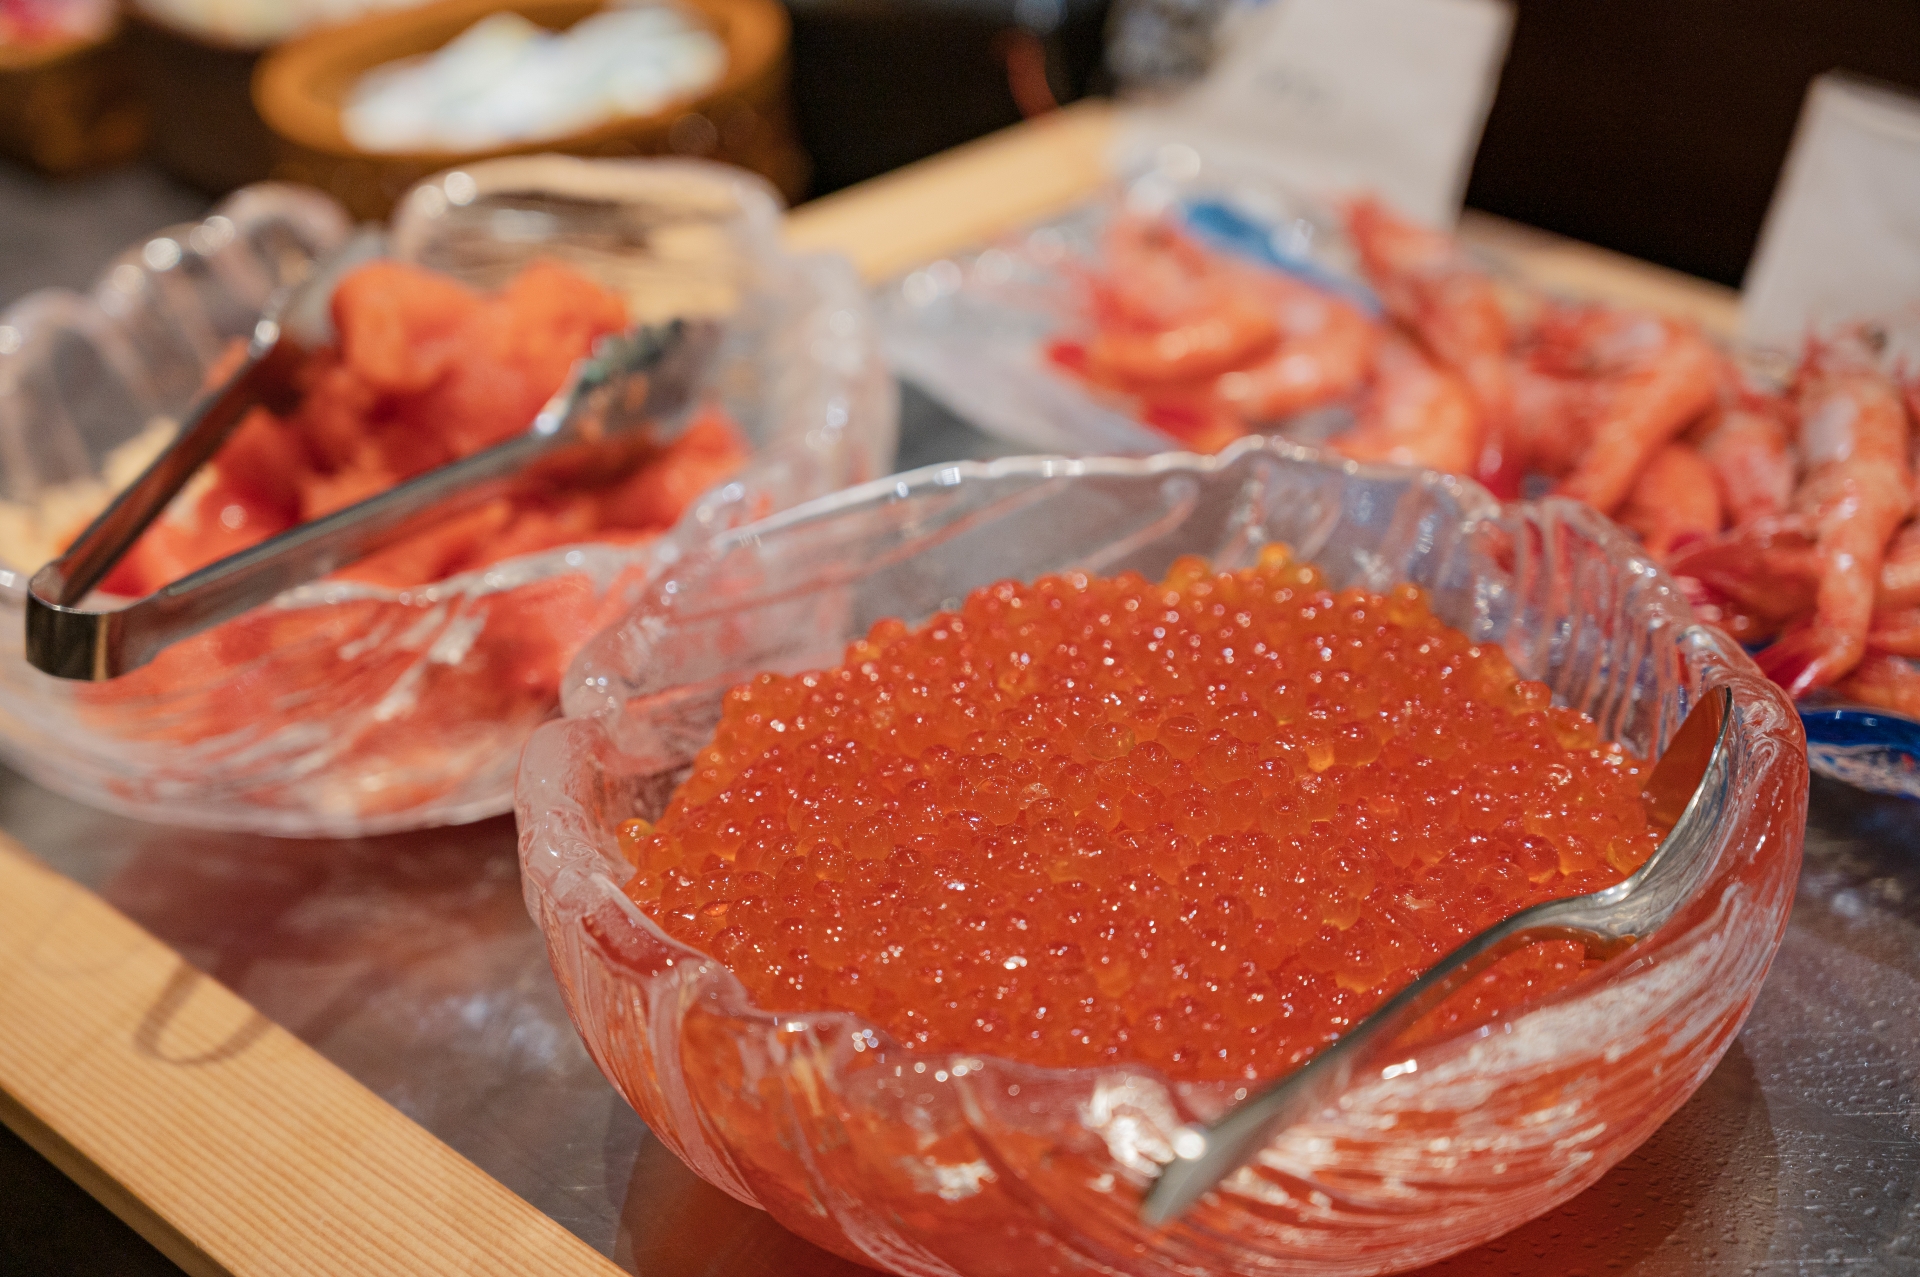 Salmon roe and other sea food plates, a common-style hotel breakfast buffet in Hokkaido